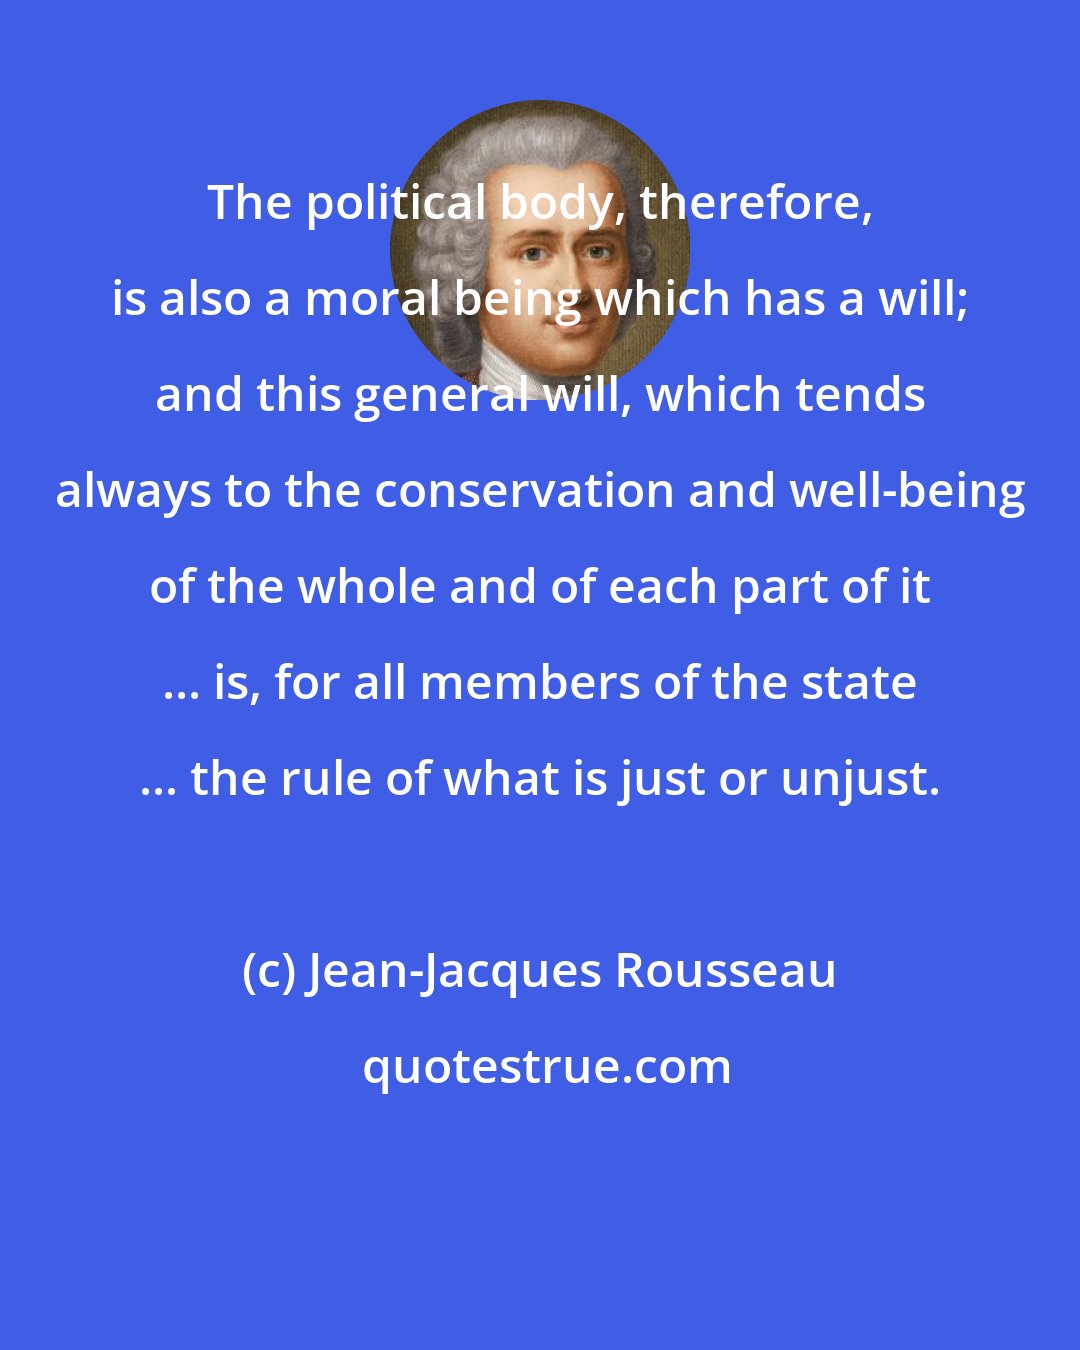 Jean-Jacques Rousseau: The political body, therefore, is also a moral being which has a will; and this general will, which tends always to the conservation and well-being of the whole and of each part of it ... is, for all members of the state ... the rule of what is just or unjust.